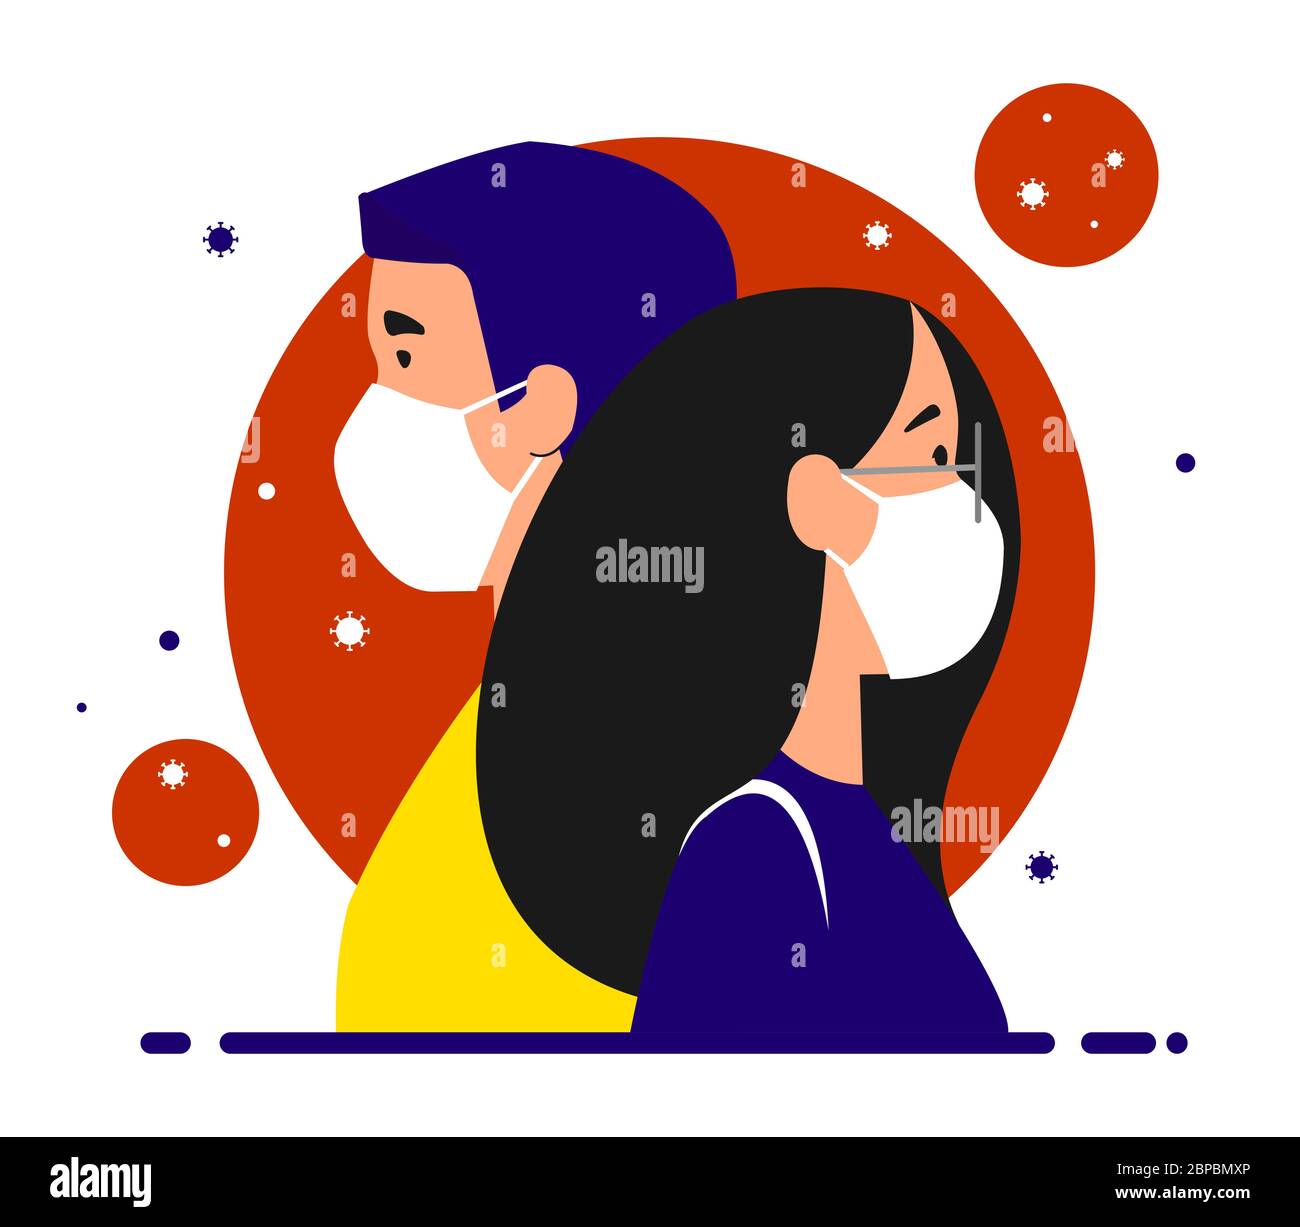 A girl and a guy in medical masks stand back to back. viruses around them in the air. Together against coronavirus. Stay home, quarantine, isolation c Stock Vector